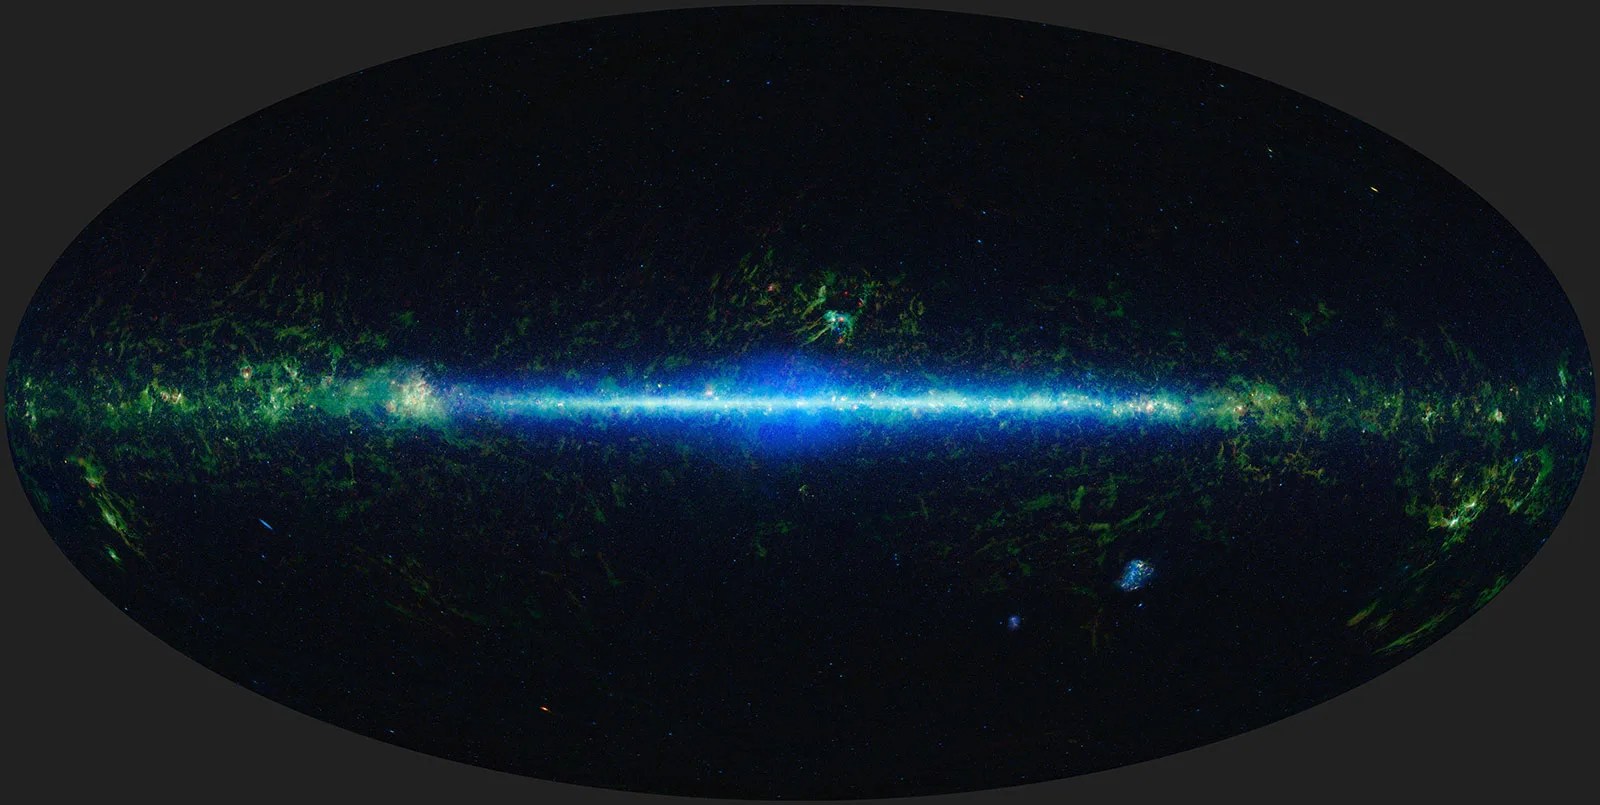 This mosaic shows the entire sky imaged by the Wide-field Infrared Survey Explorer (WISE)